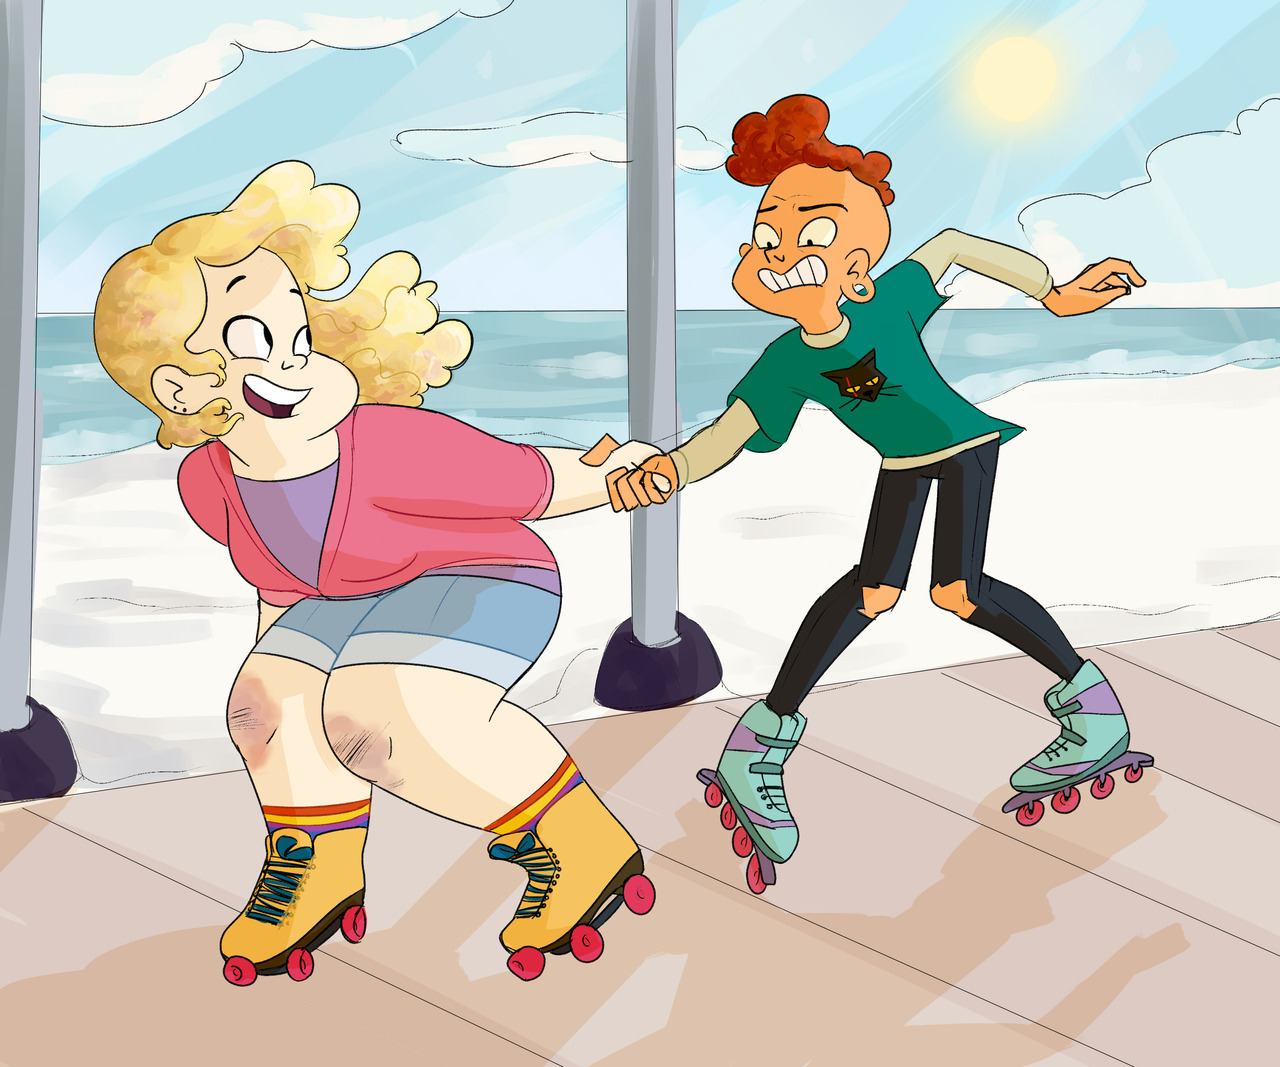 They are spending some time together (Roller skating was sadie’s idea)